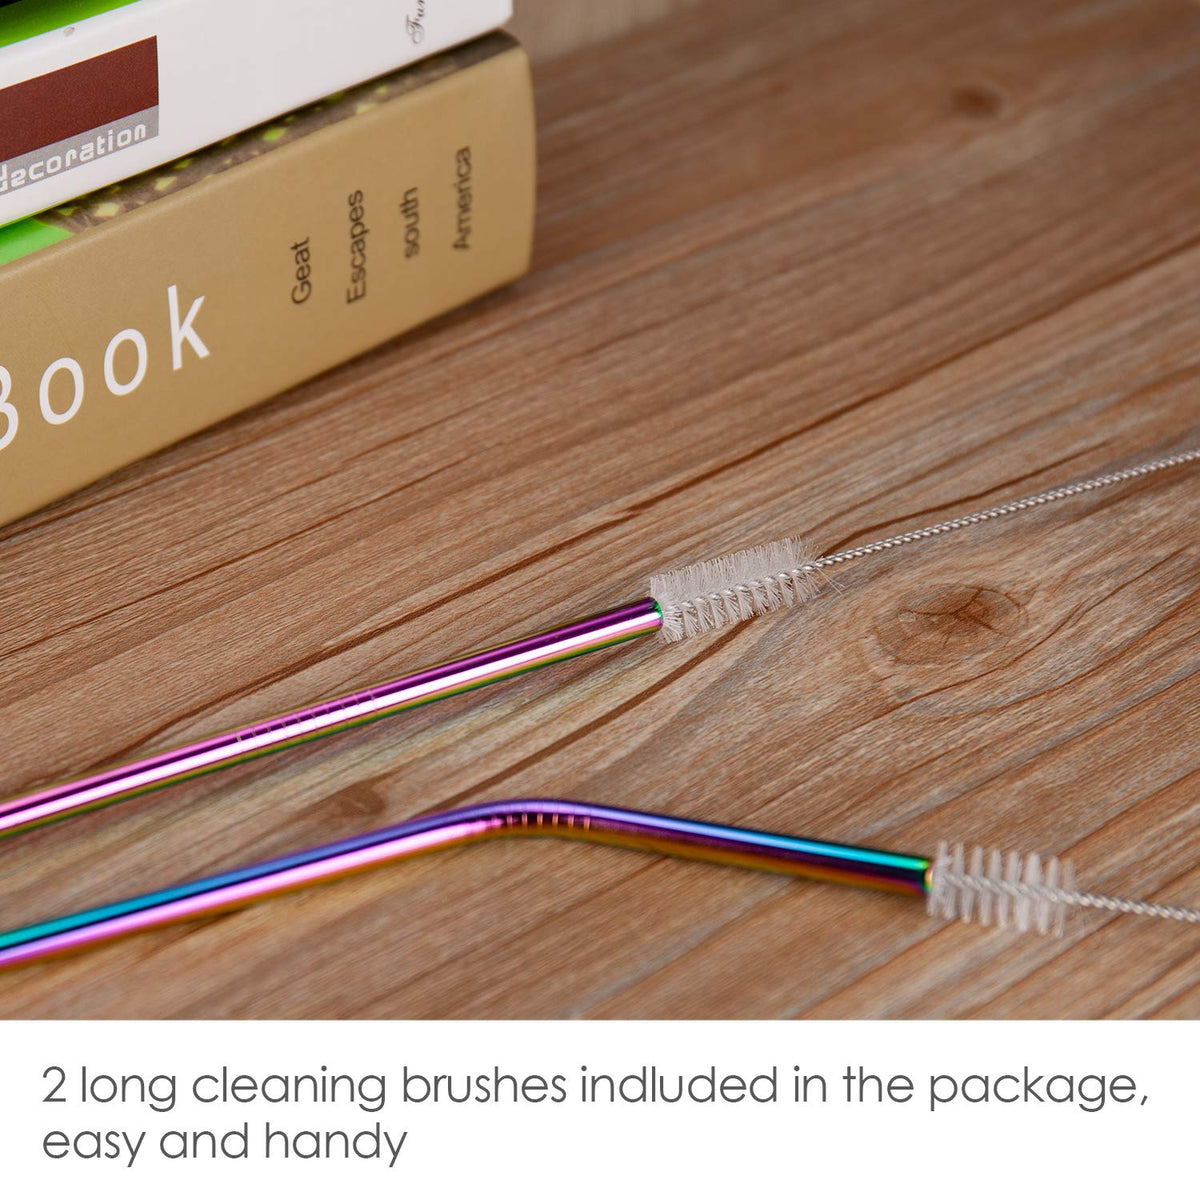 Ecowaare 8pcs Stainless Steel Straws with 2 Cleaning Brushes Silicon C